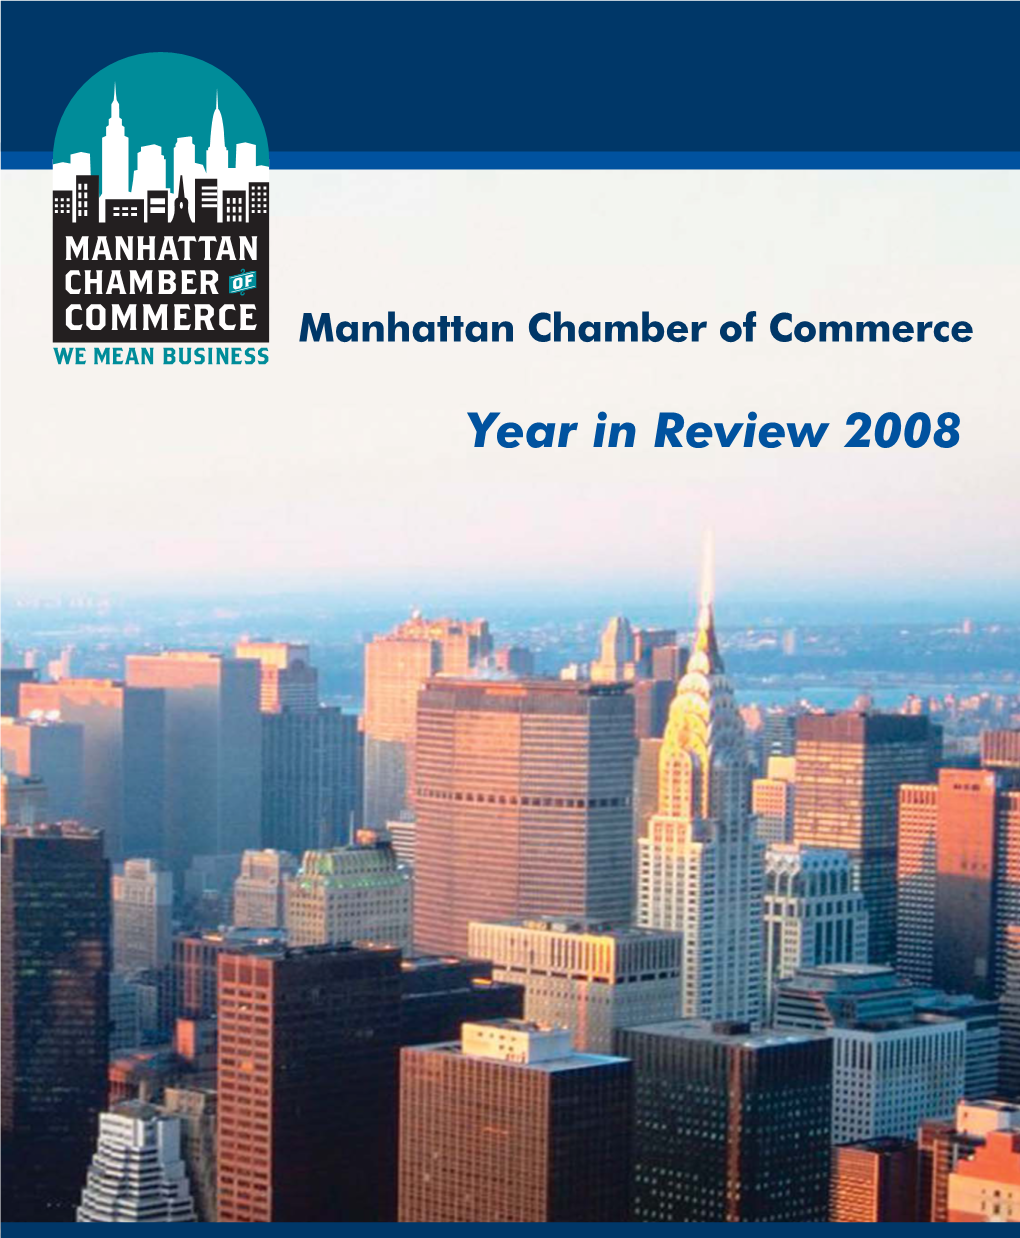 Manhattan Chamber of Commerce Year in Review 2008